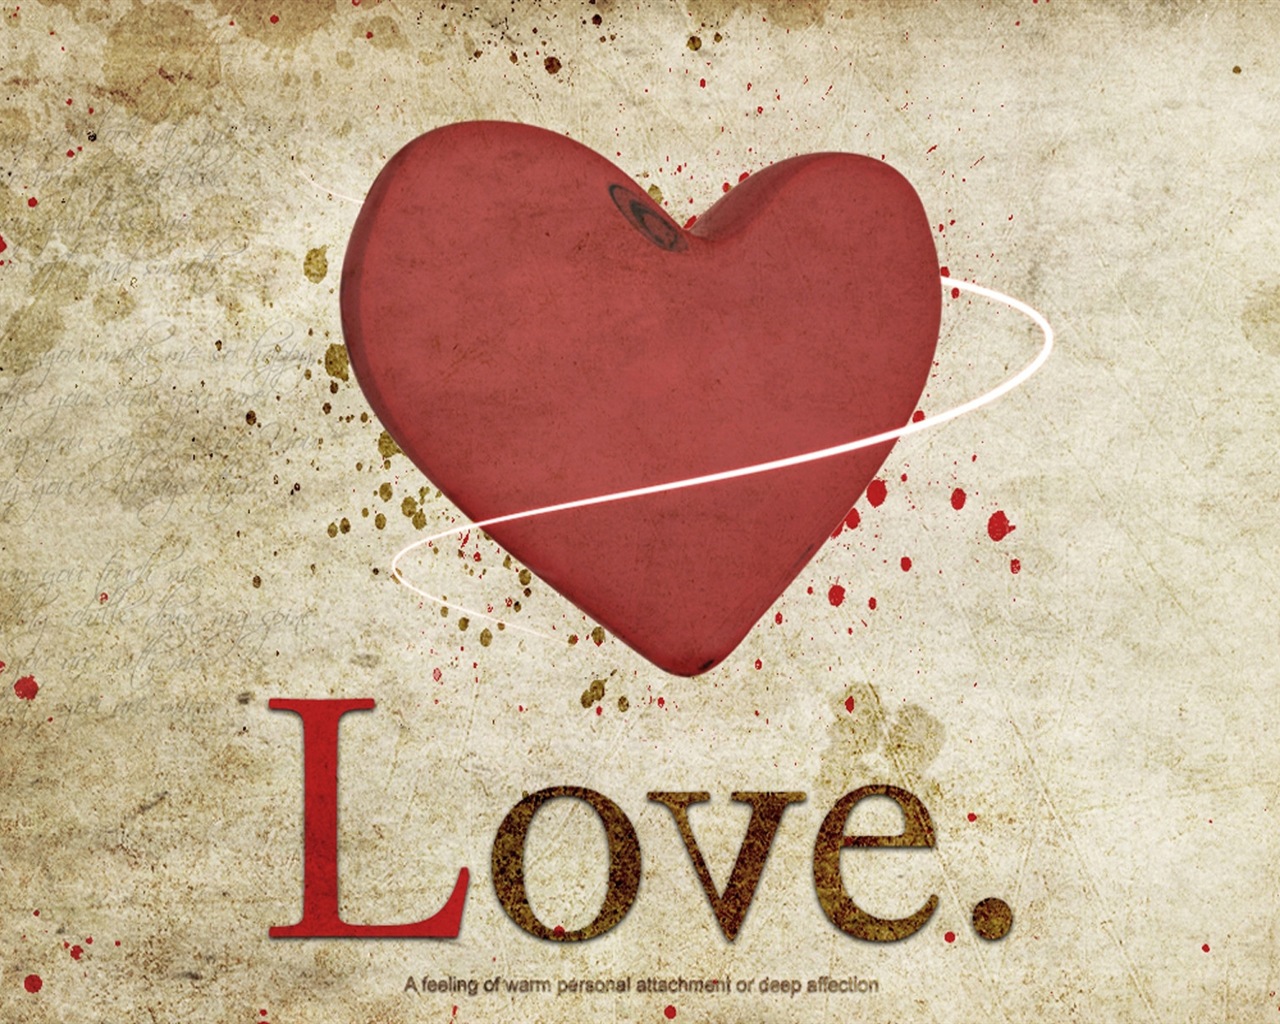 The theme of love, creative heart-shaped HD wallpapers #16 - 1280x1024